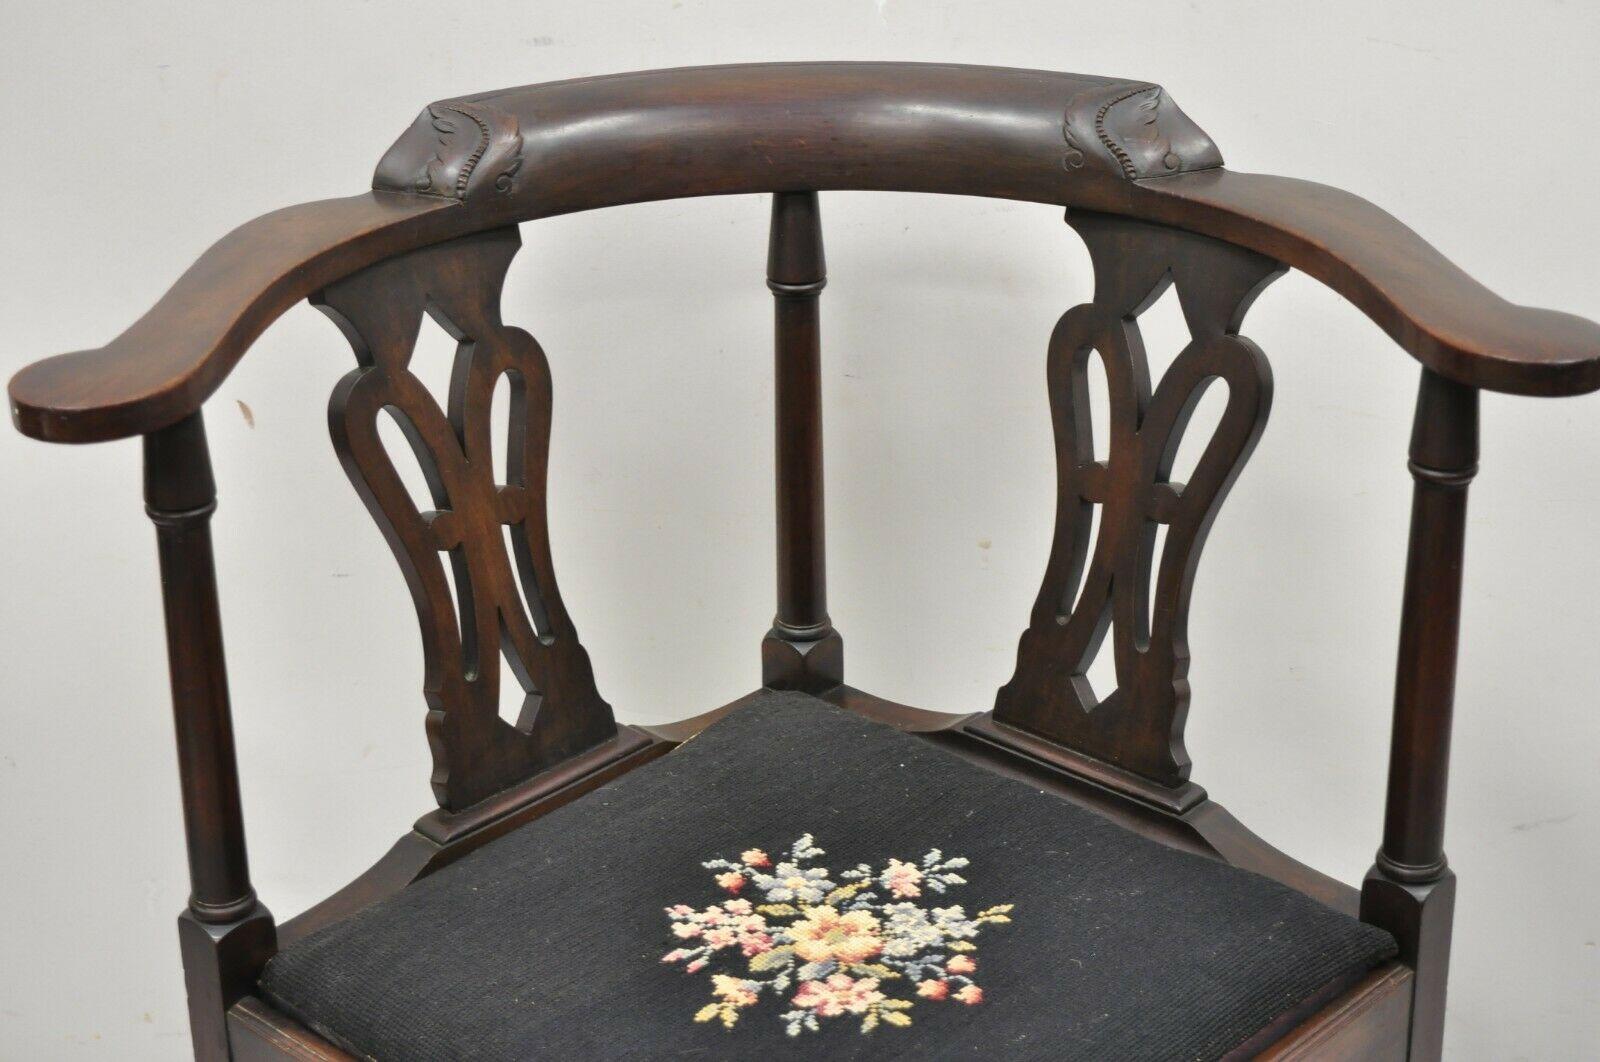 Antique English Chippendale Georgian style mahogany ball and claw corner chair. Item features a needlepoint seat, solid wood construction, nicely carved details, carved ball and claw feet, very nice antique item, quality craftsmanship, great style